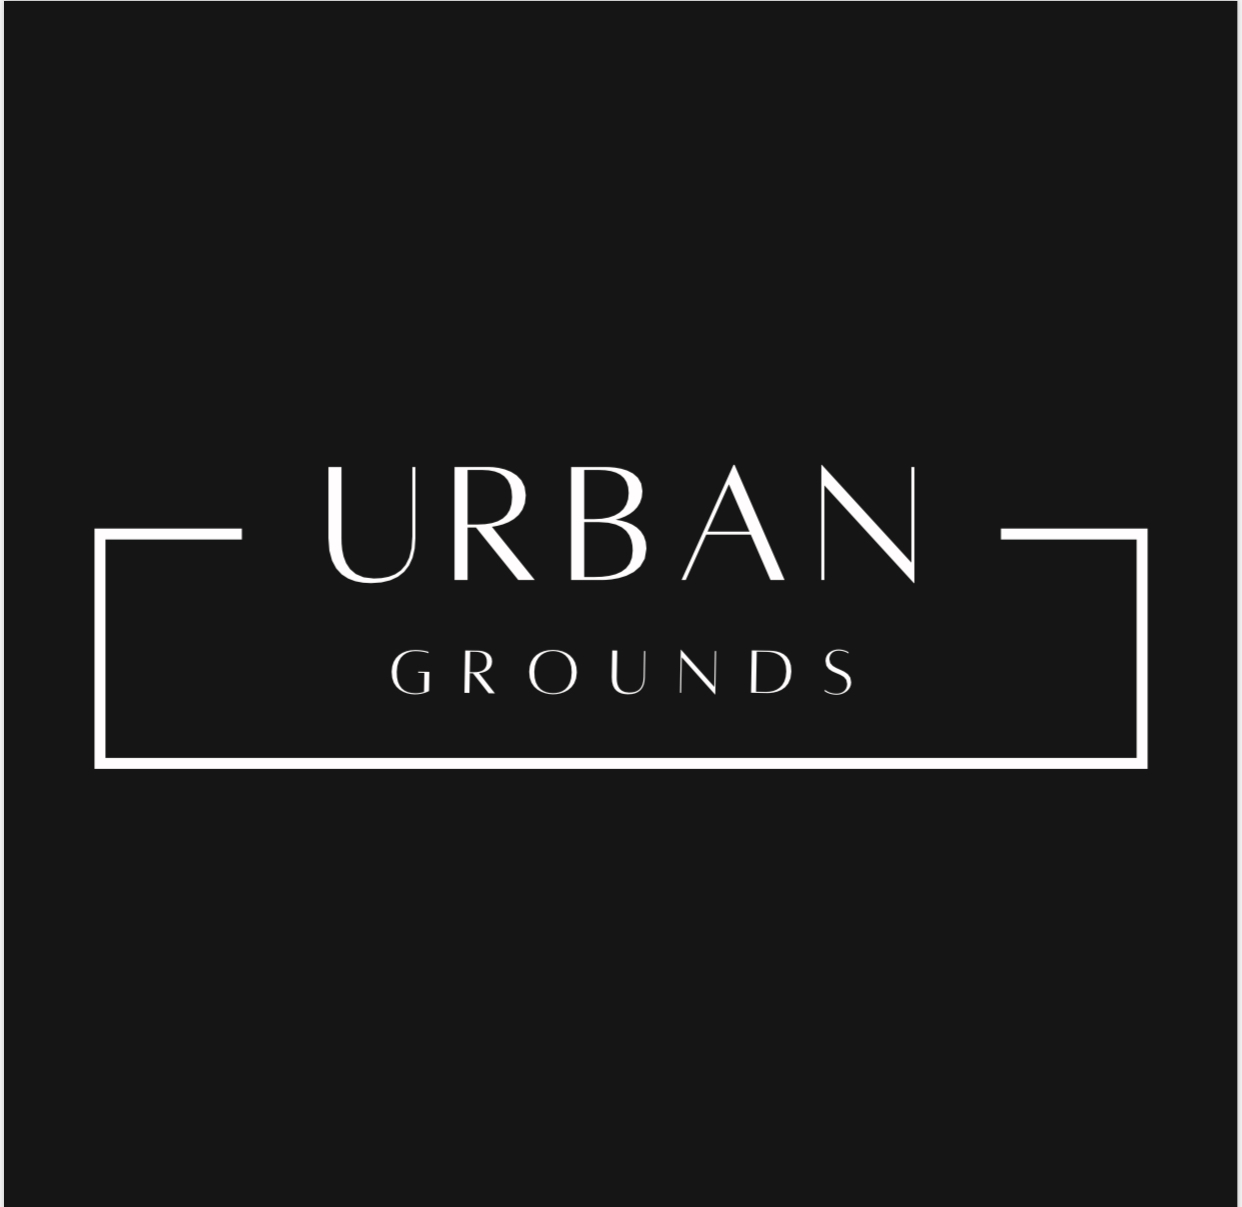 Home | Urban Grounds